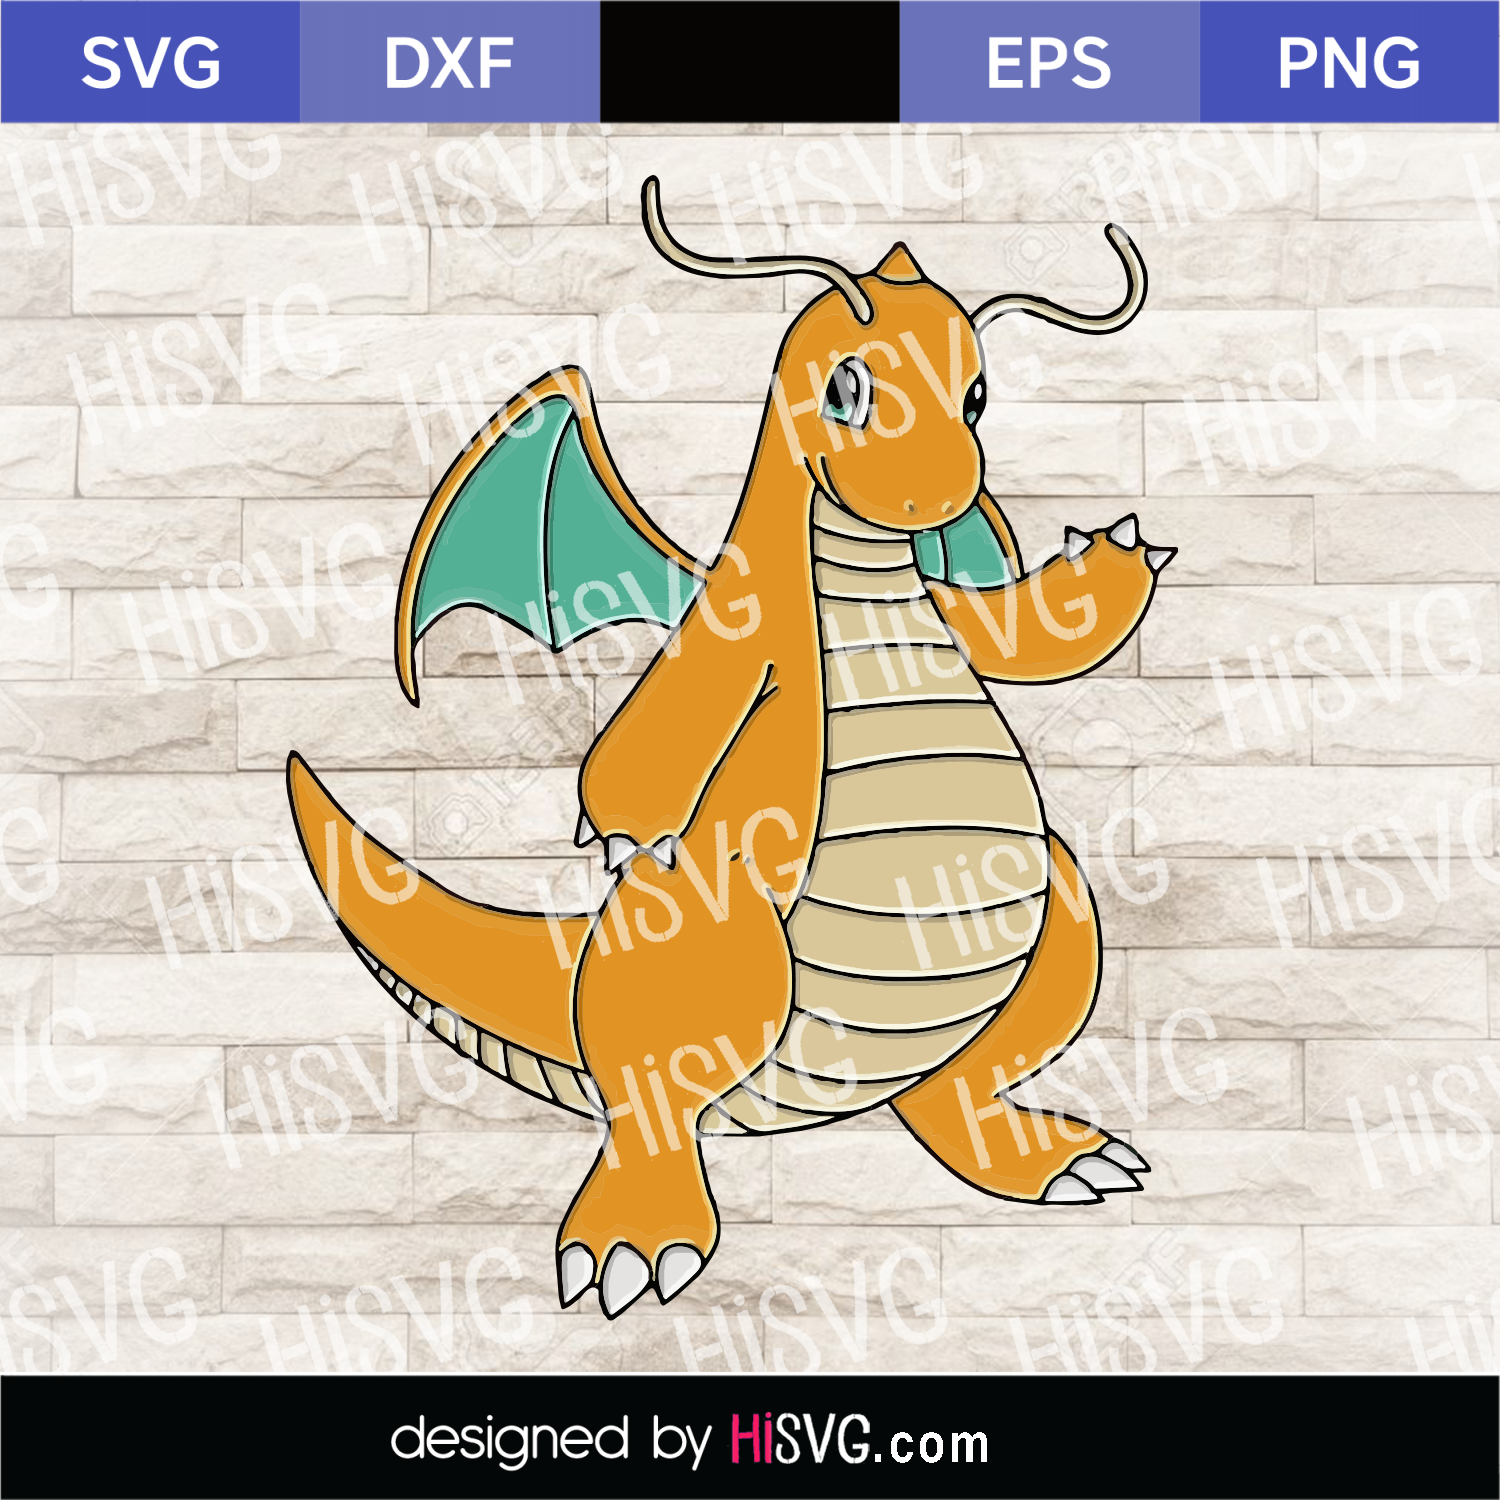 Download Dragonite Pokemon Svg Psd Ai Png Eps Sxf Ai Pokemon Characters Animes Instant Download Hisvg Com Free Svg Cut Files Hisvg Com Free Cricut And Silhouette Cut Files